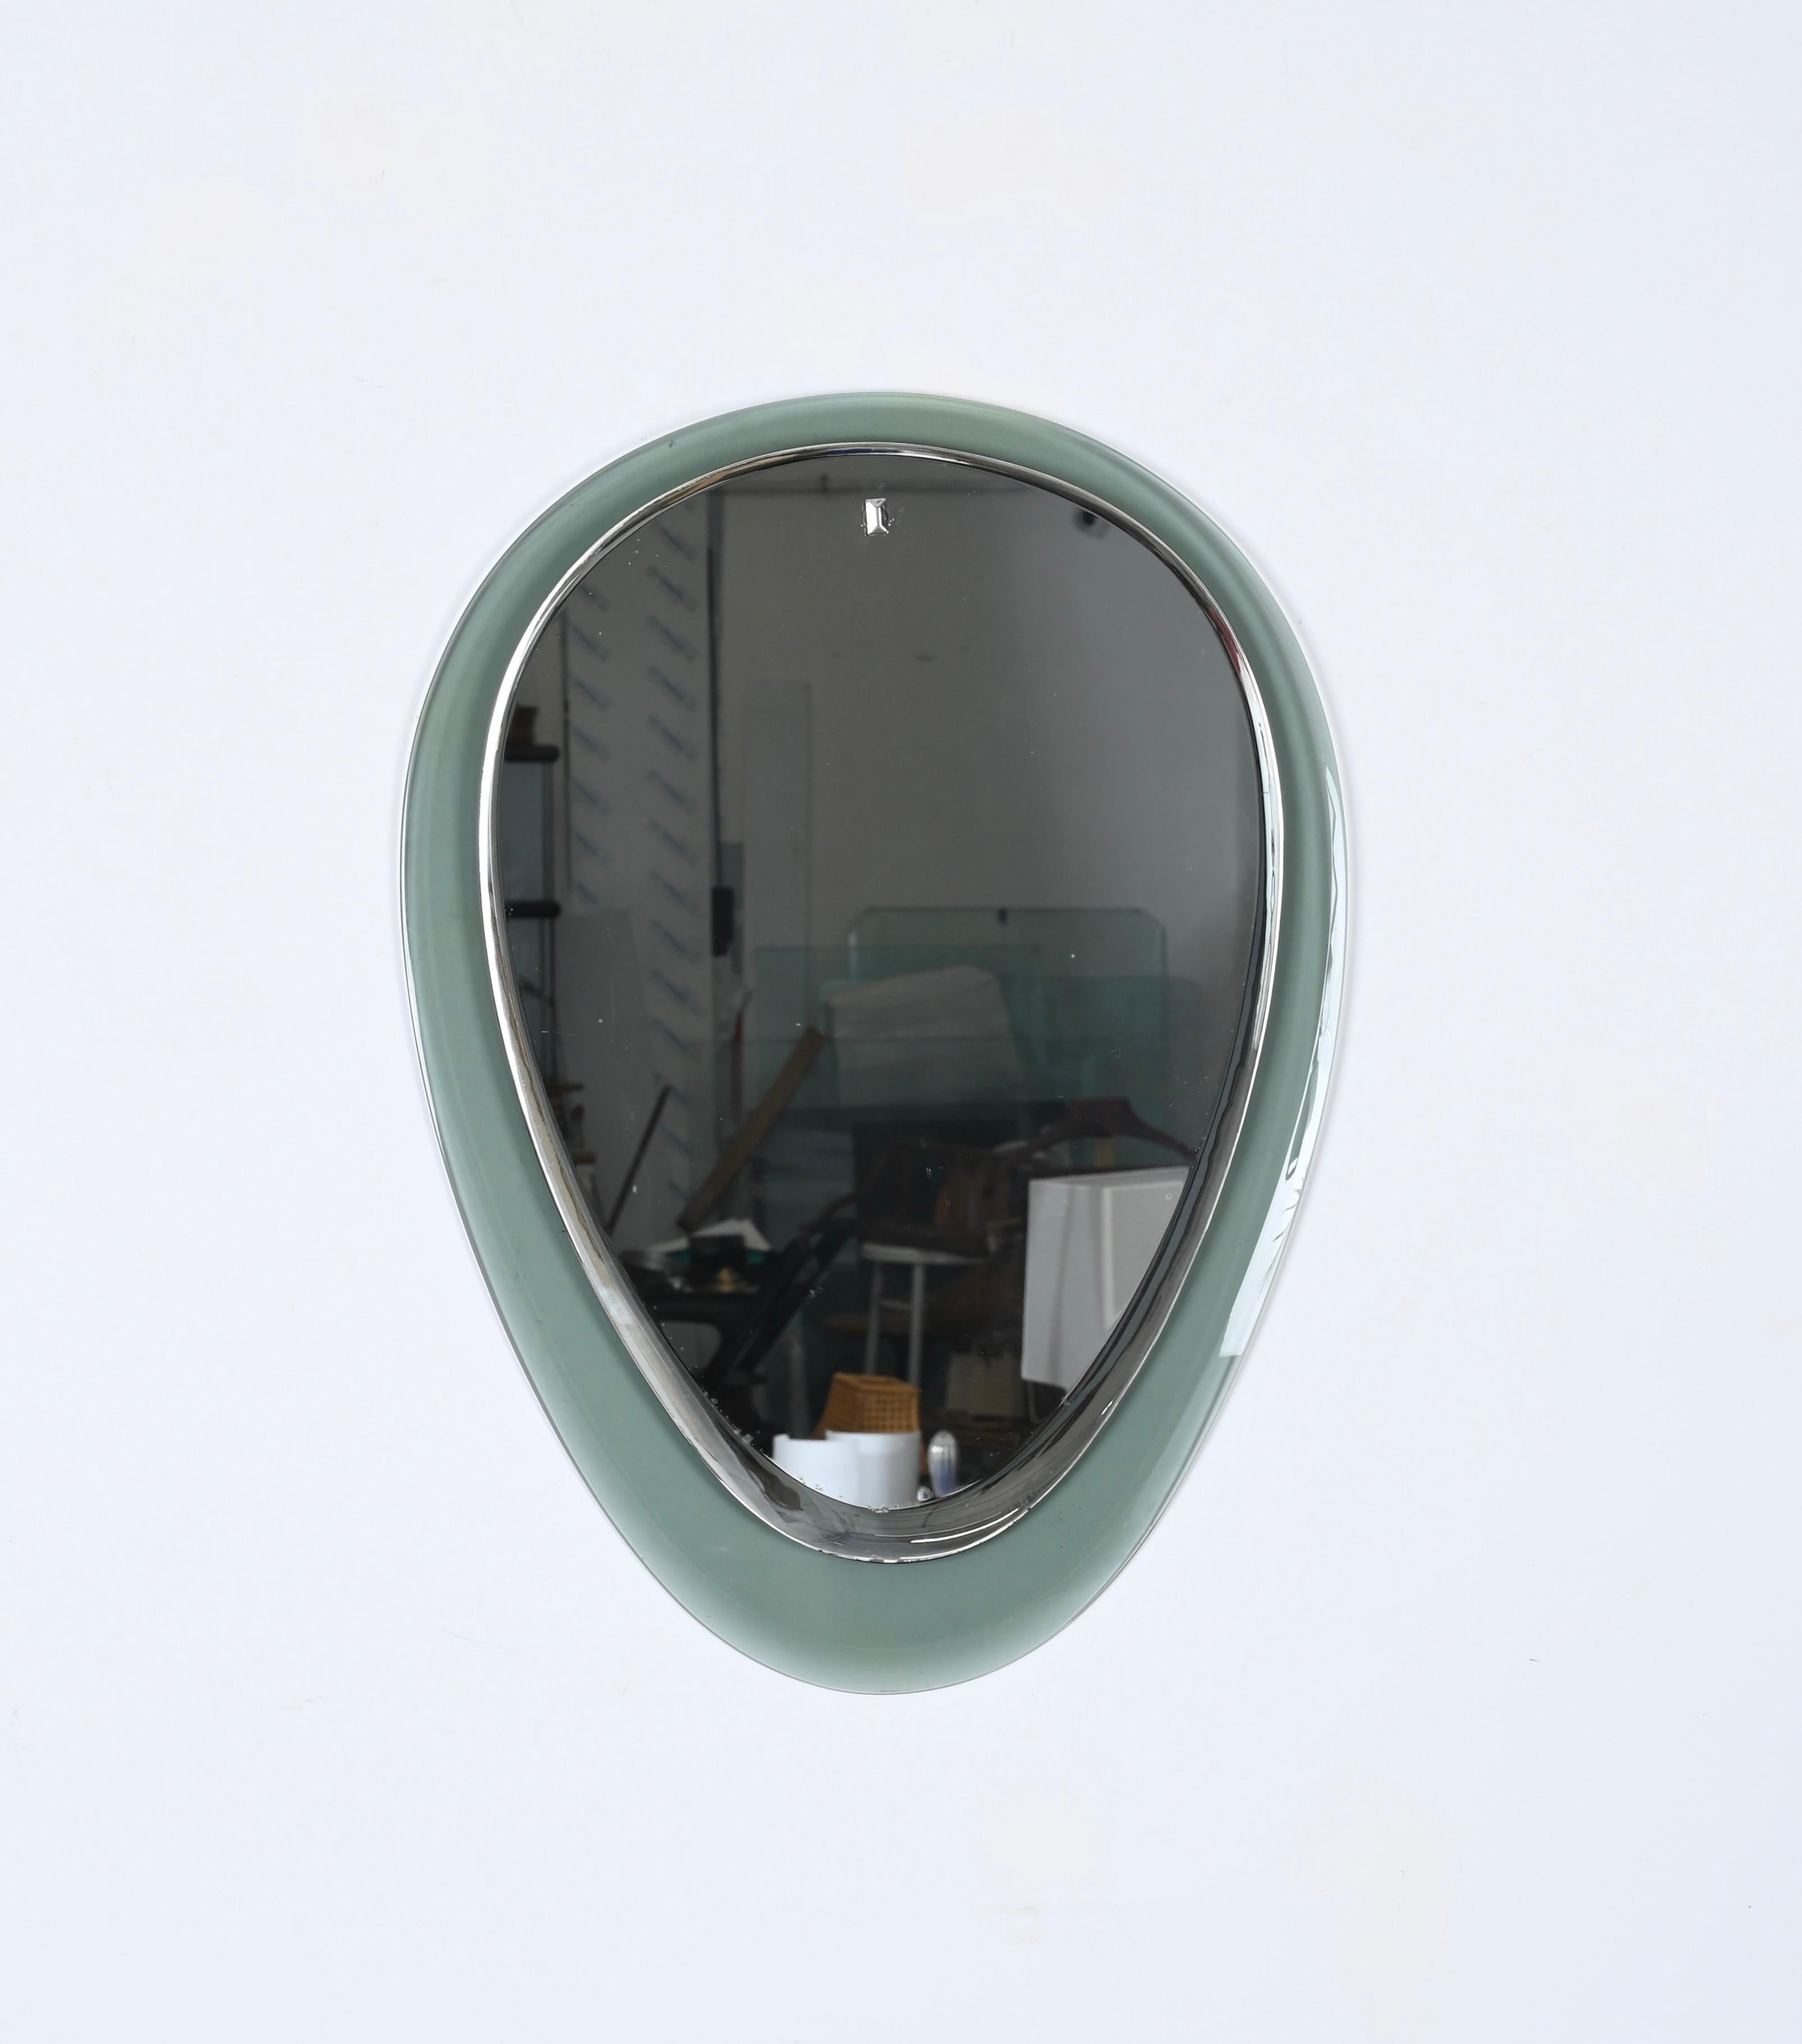 Cristal Art Green Aquamarine Beveled Oval Wall Mirror, Italy, 1950s For Sale 5